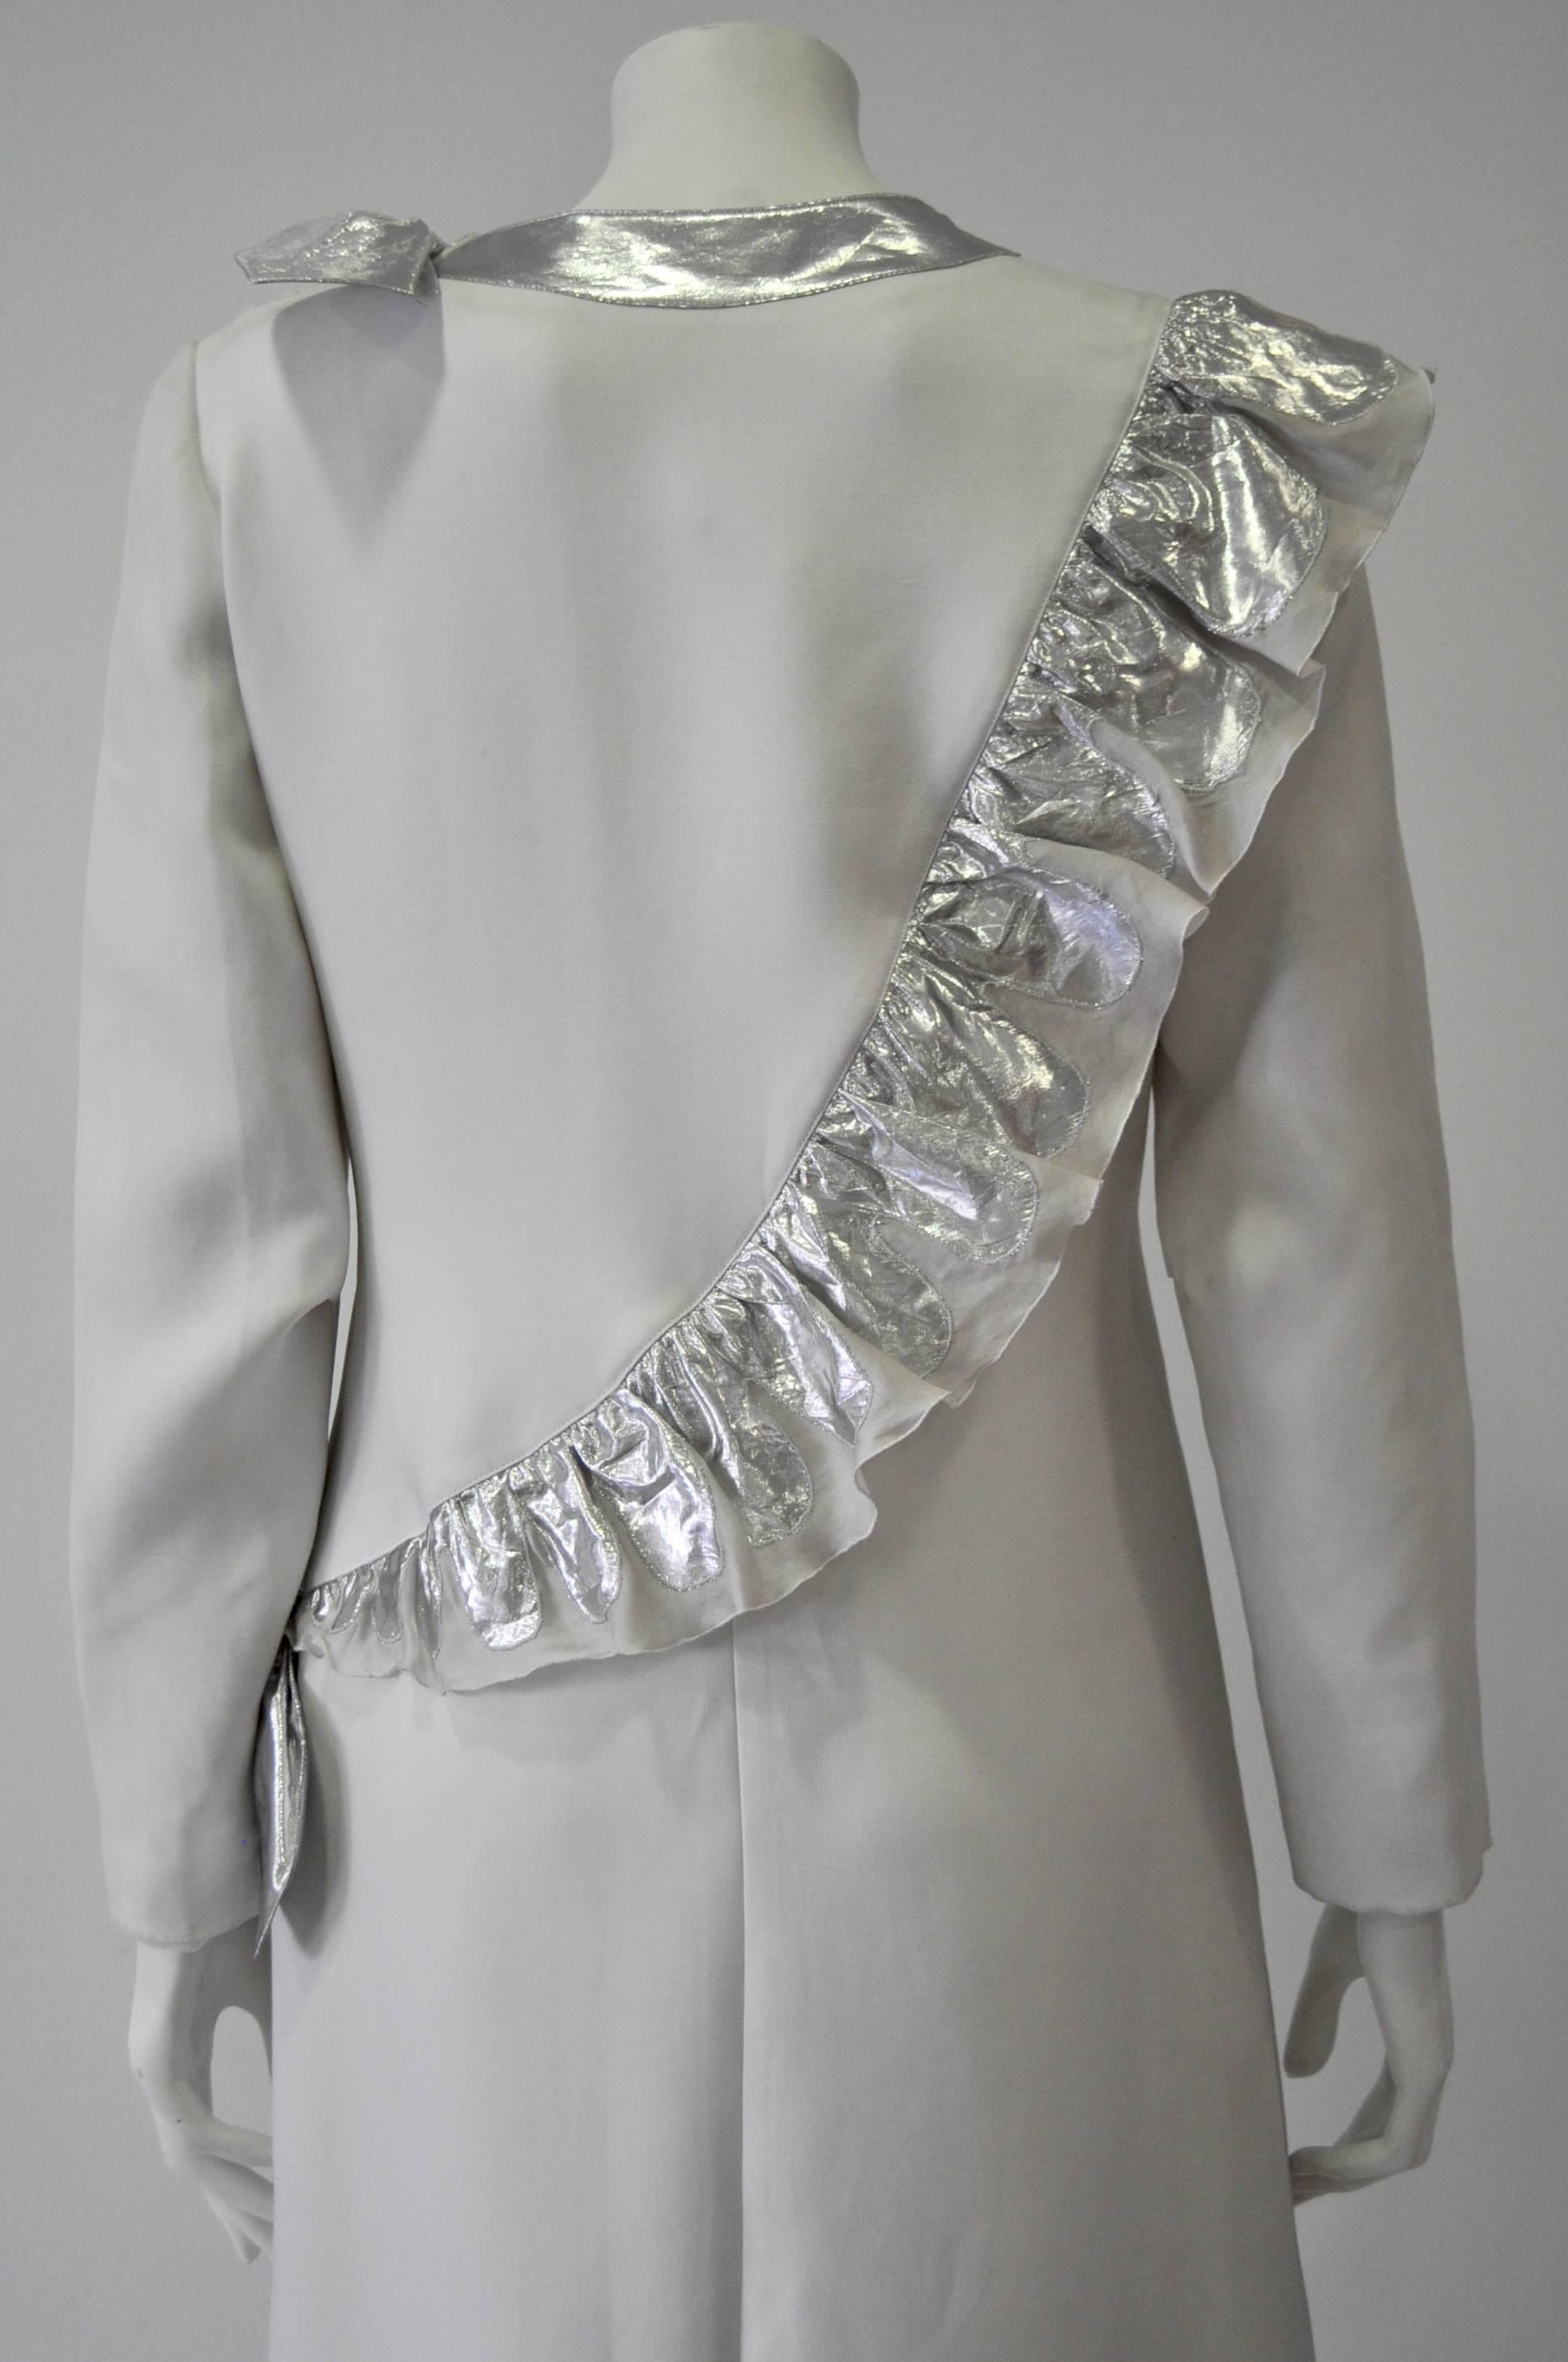 Museum Quality Courreges Metallic Ruffle Sash Evening Gown For Sale 1